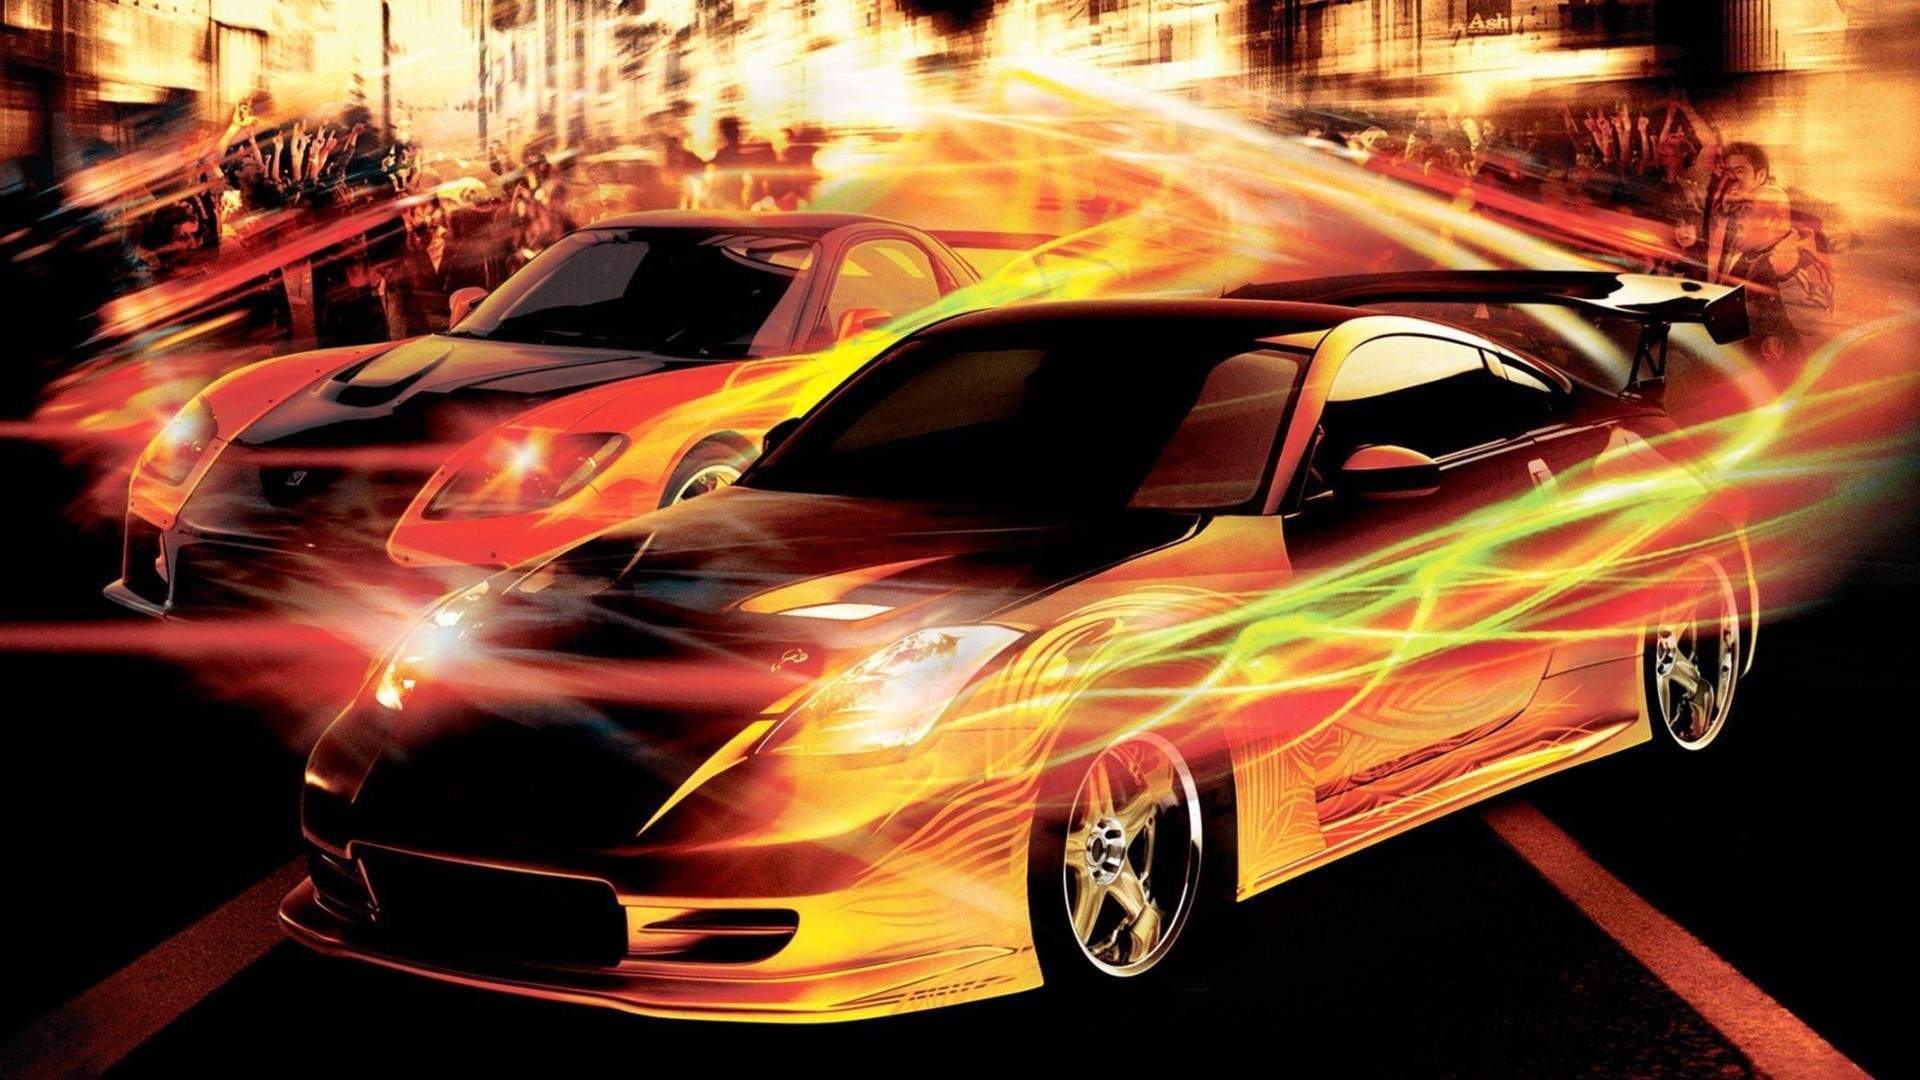 FAST AND THE FURIOUS TOKYO DRIFT tuning wallpaper background